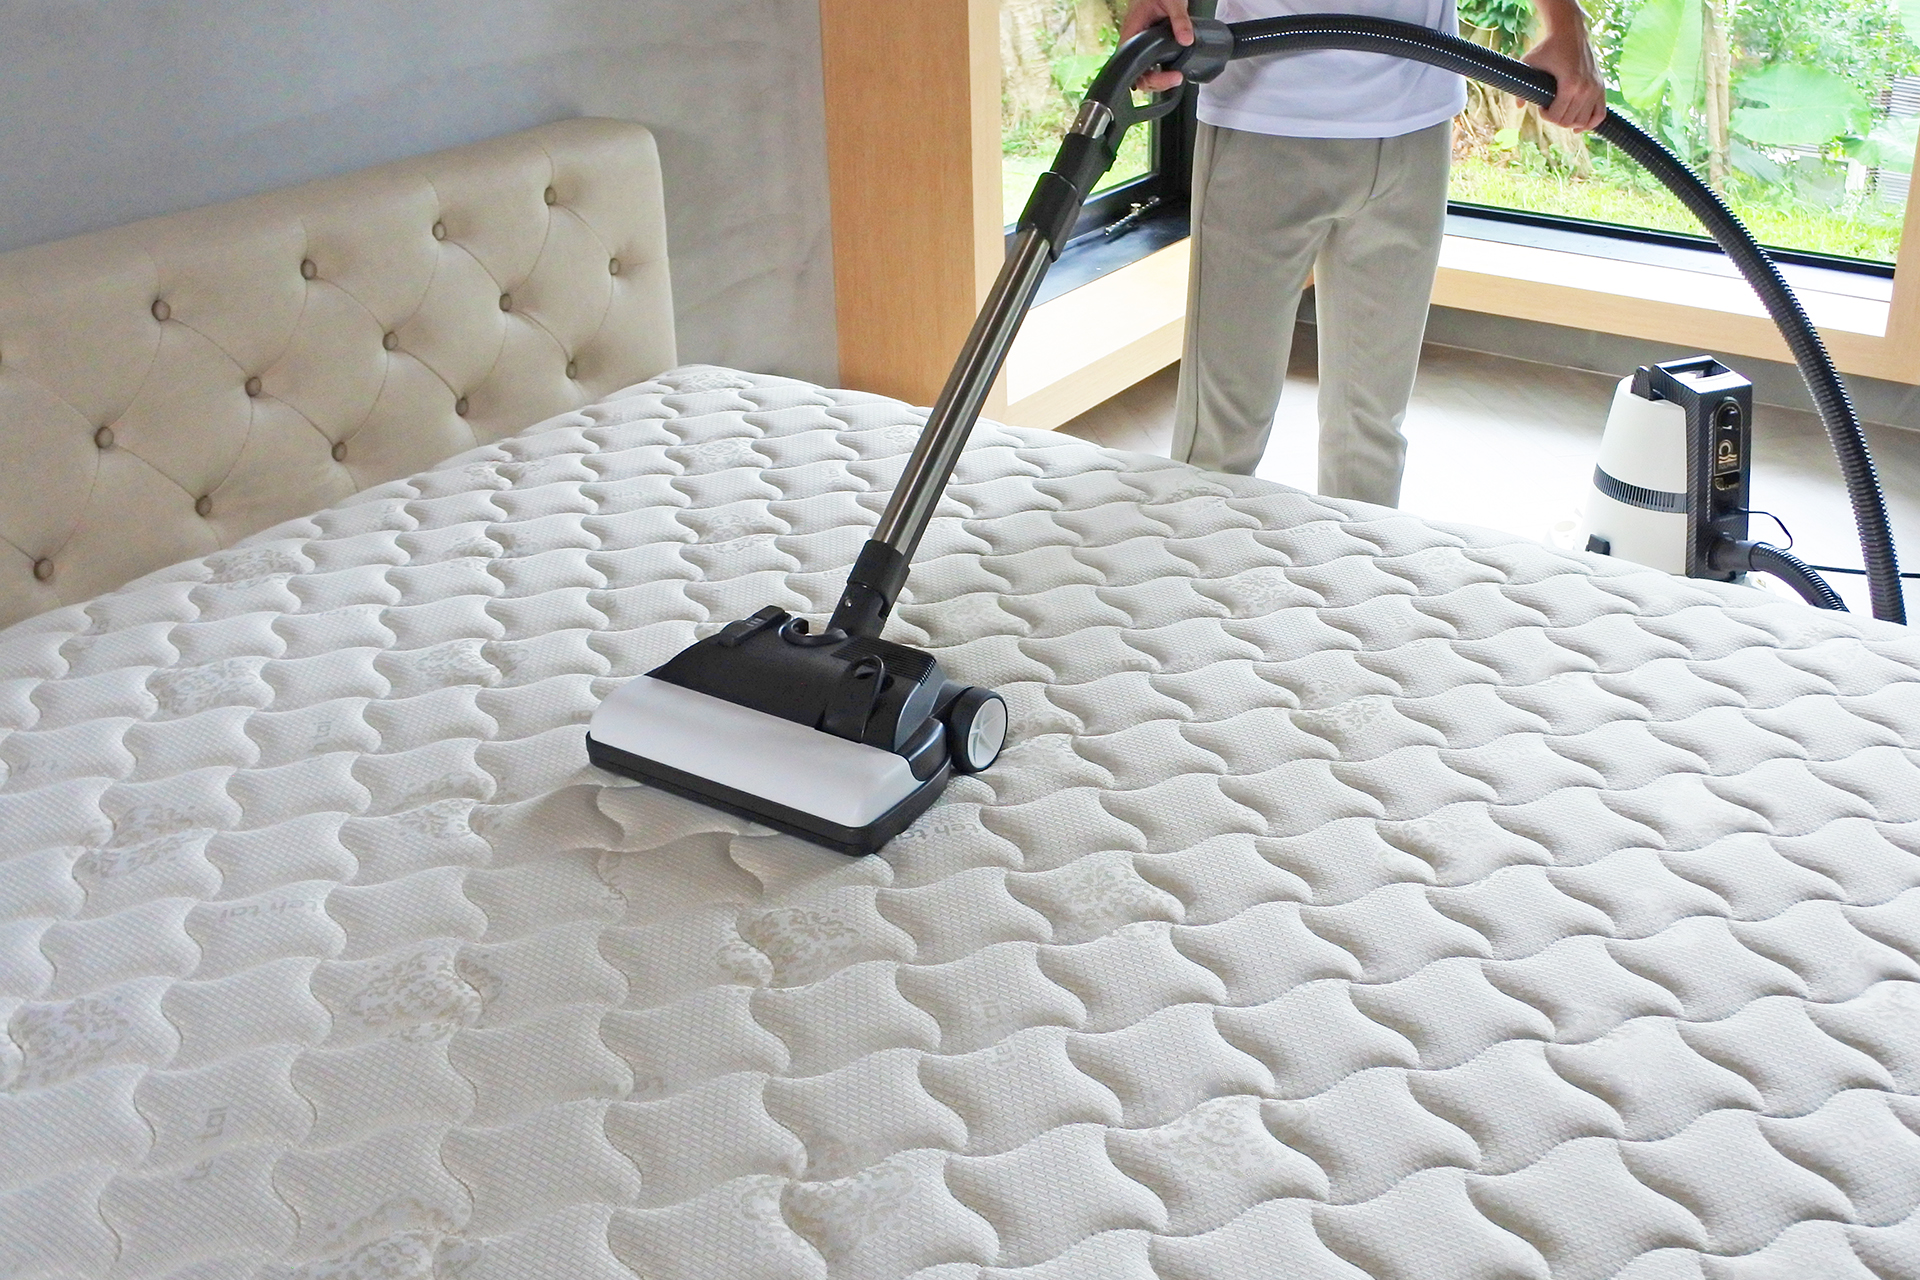 Mattress Cleaning Services: What You Need to Know